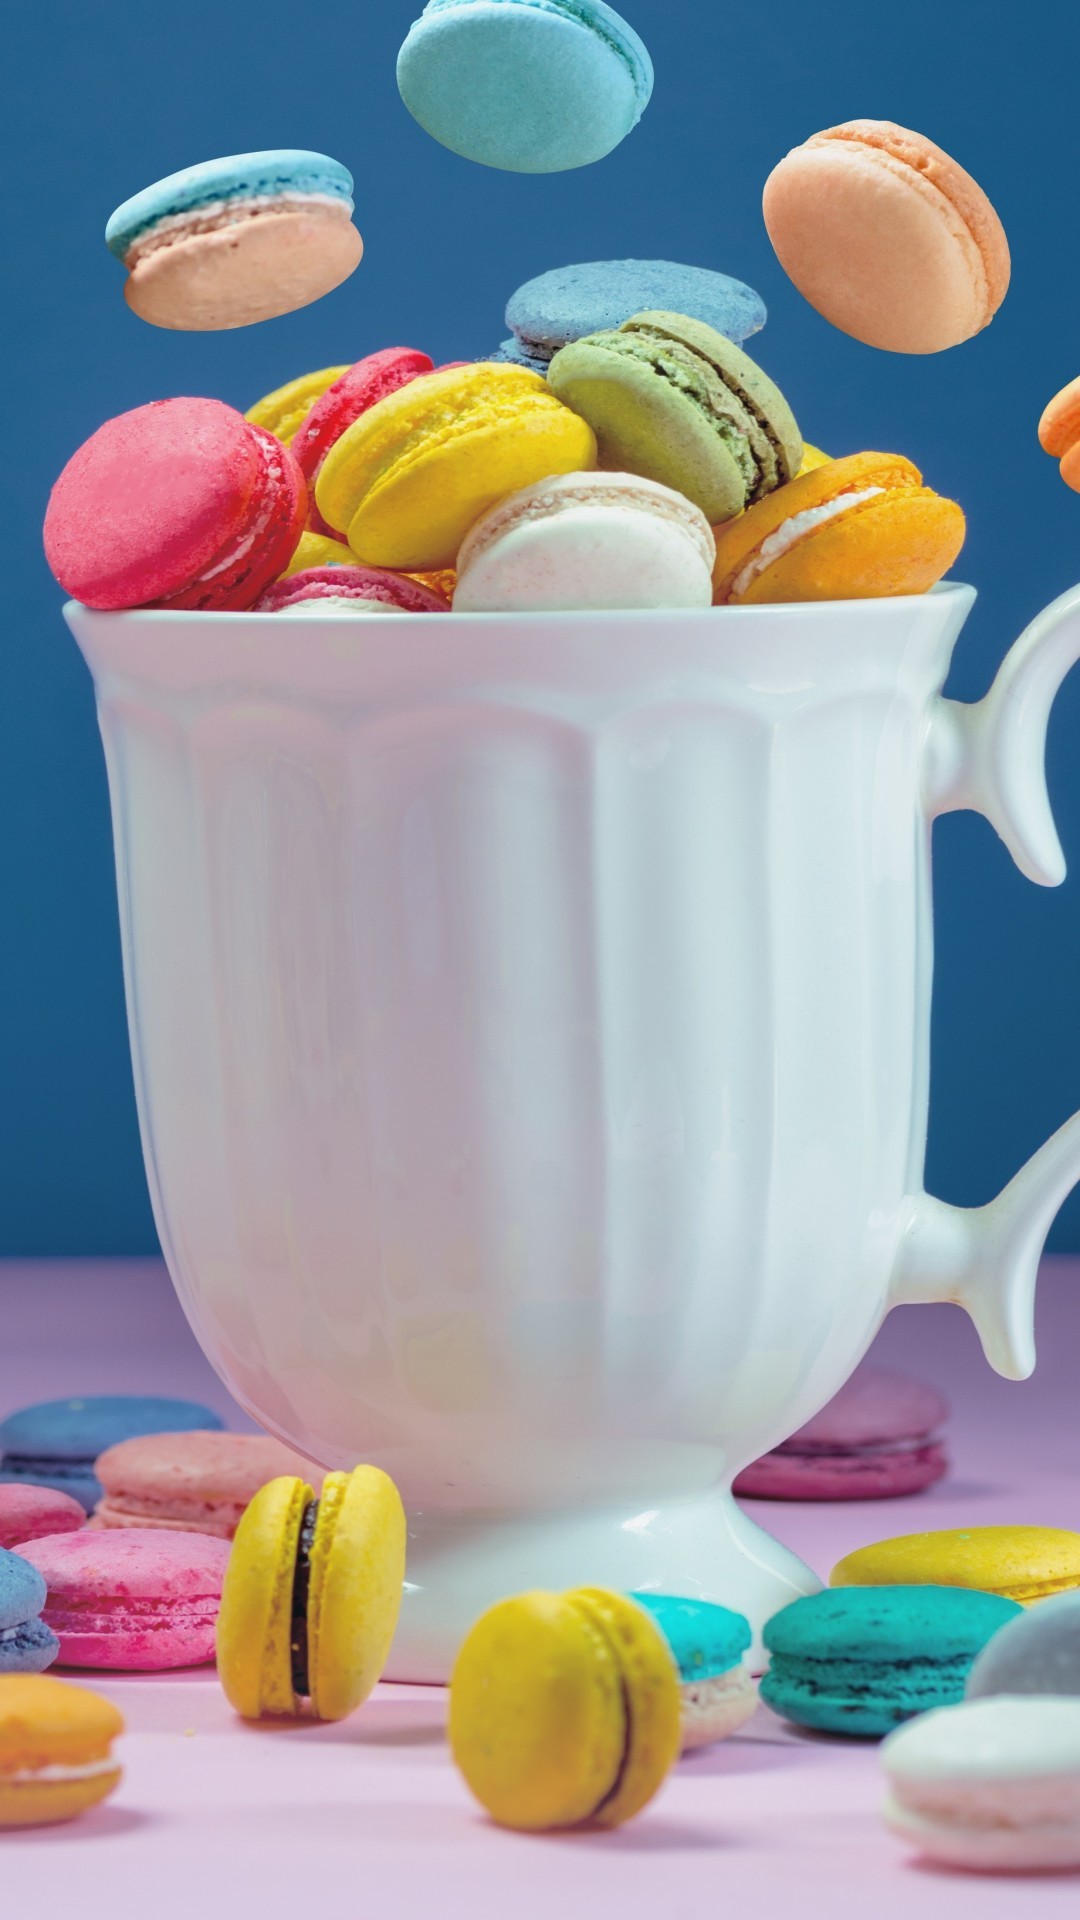 1080x1920 Macaron Cup, Pastry, Sweets